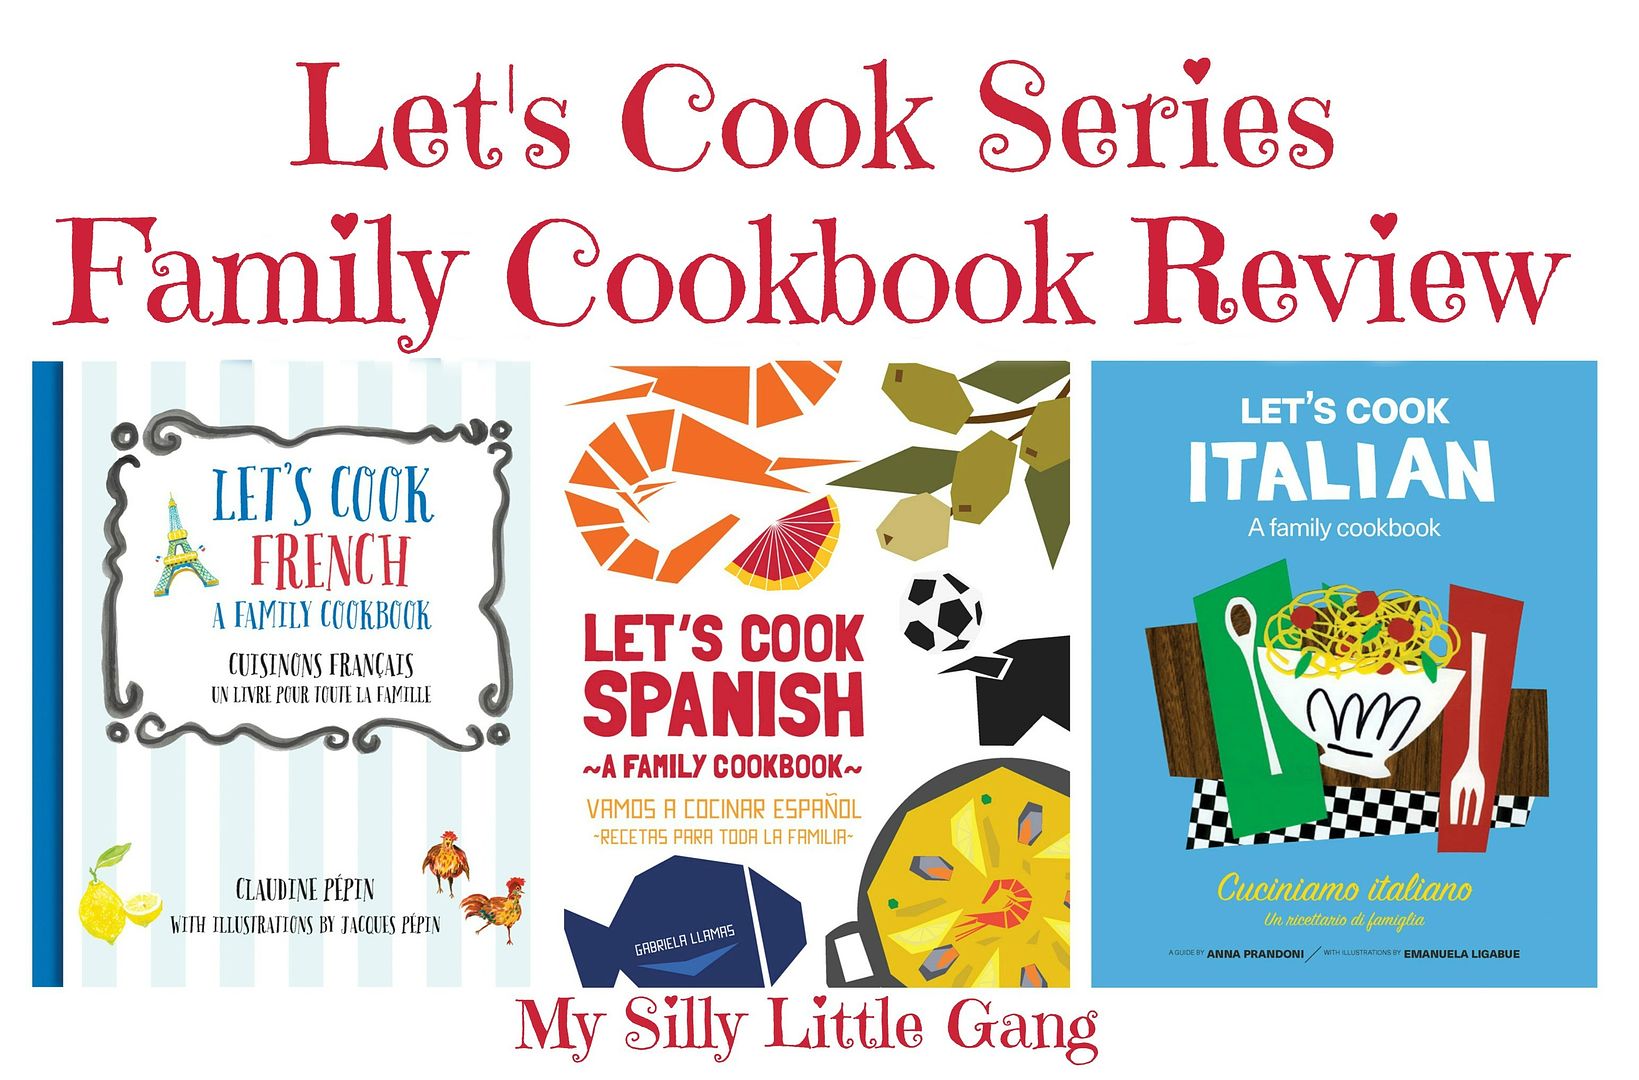 Let's Cook Series Cookbook Review